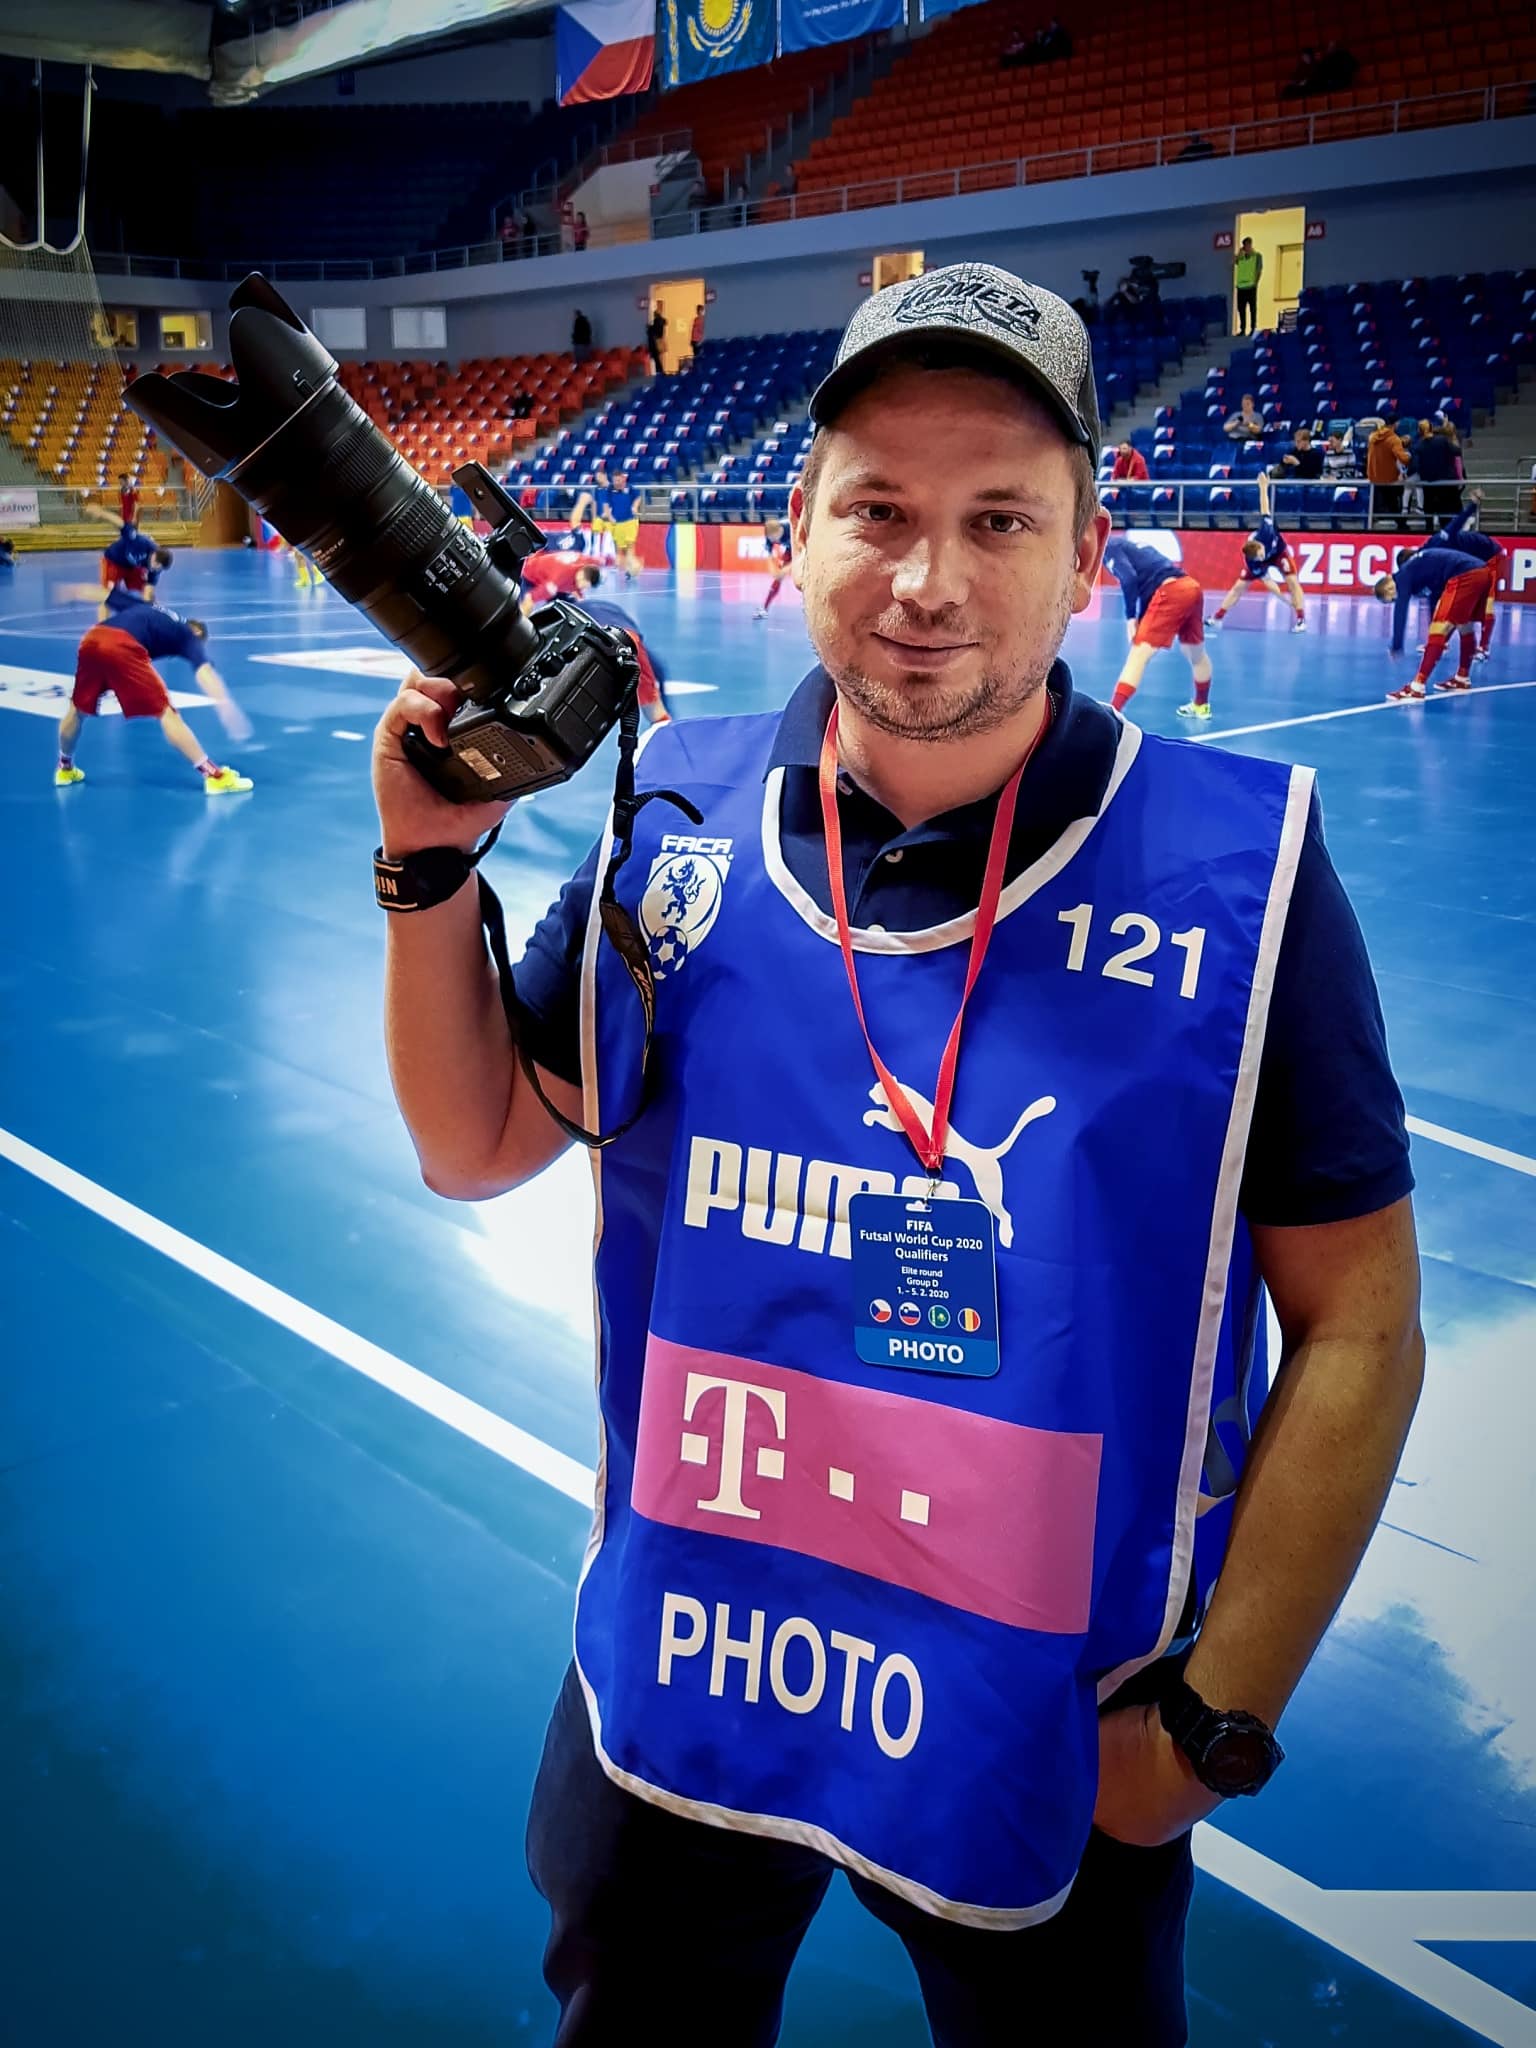 How to photograph in the sports hall: dress appropriately and cover your  camera